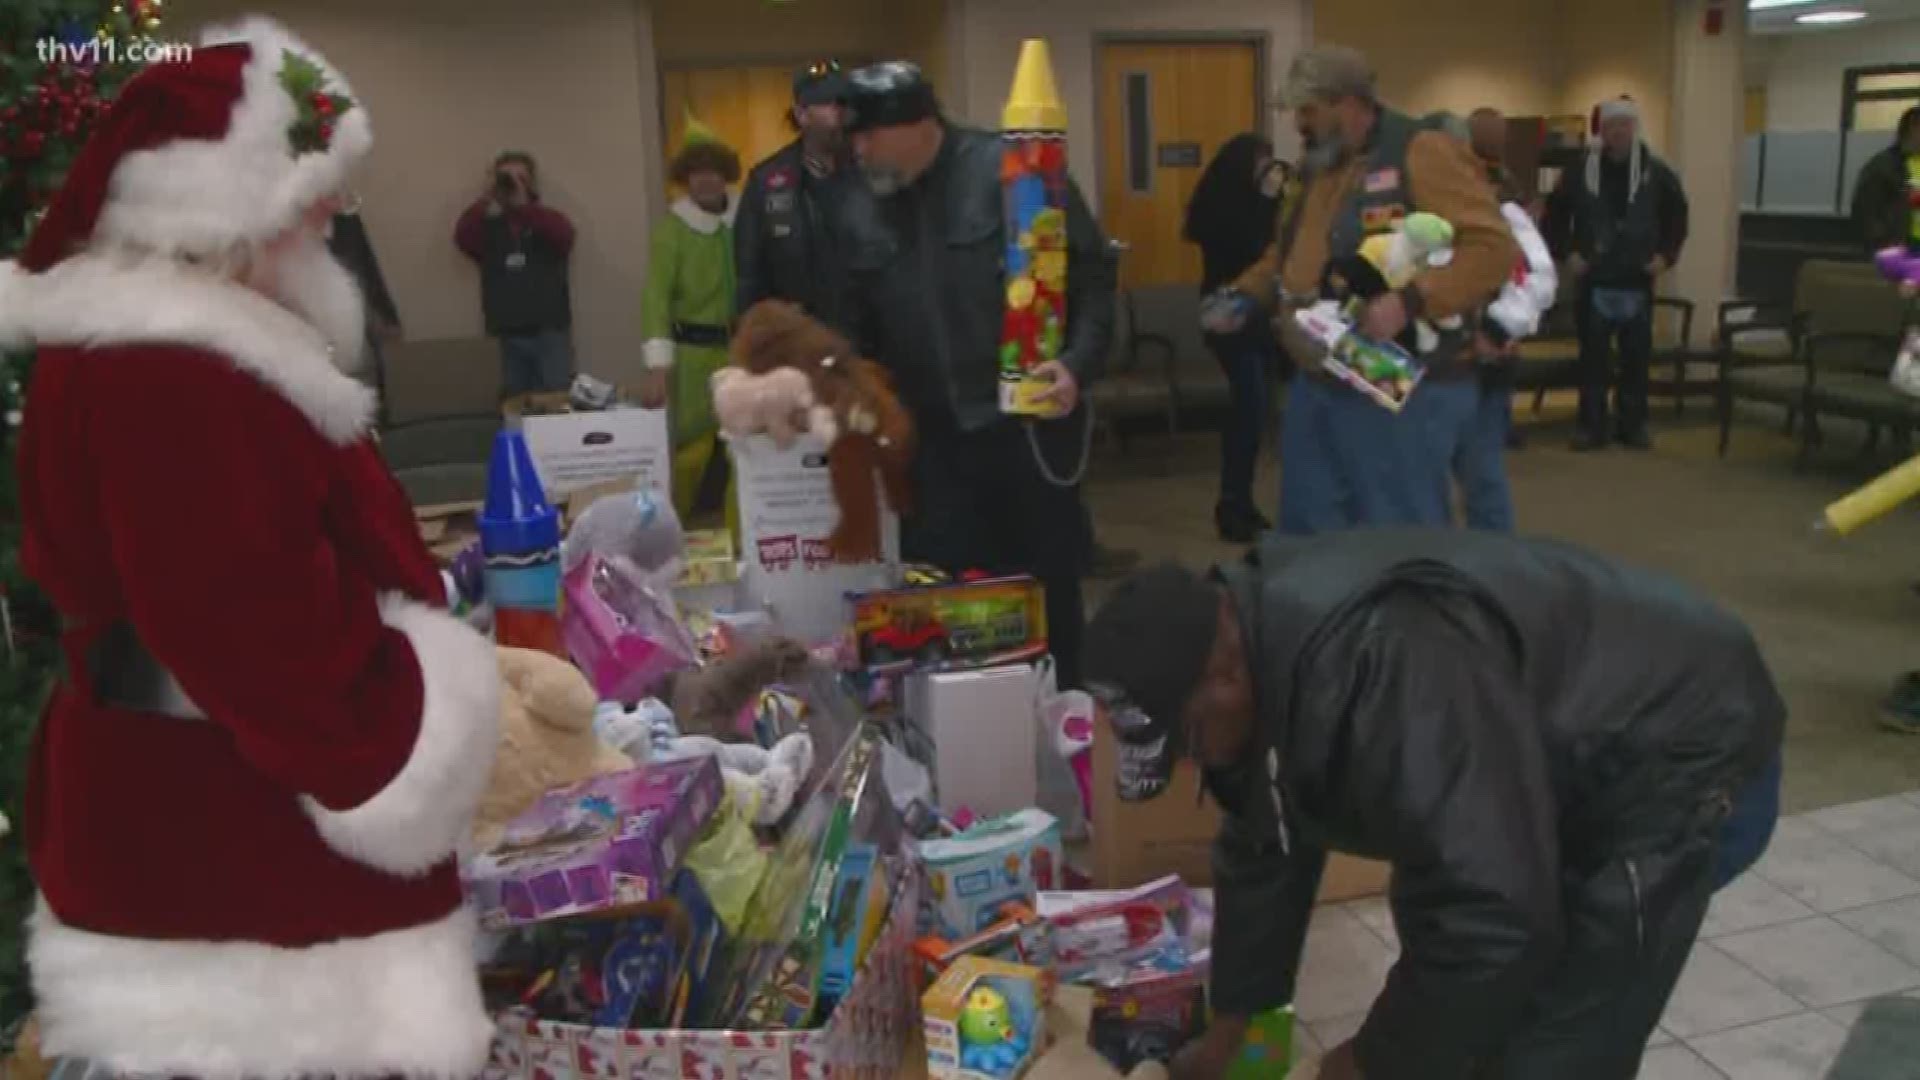 They all collected toys that will be passed out to children at Conway Regional Health System throughout the year, but especially to kids who will spend the holidays there.